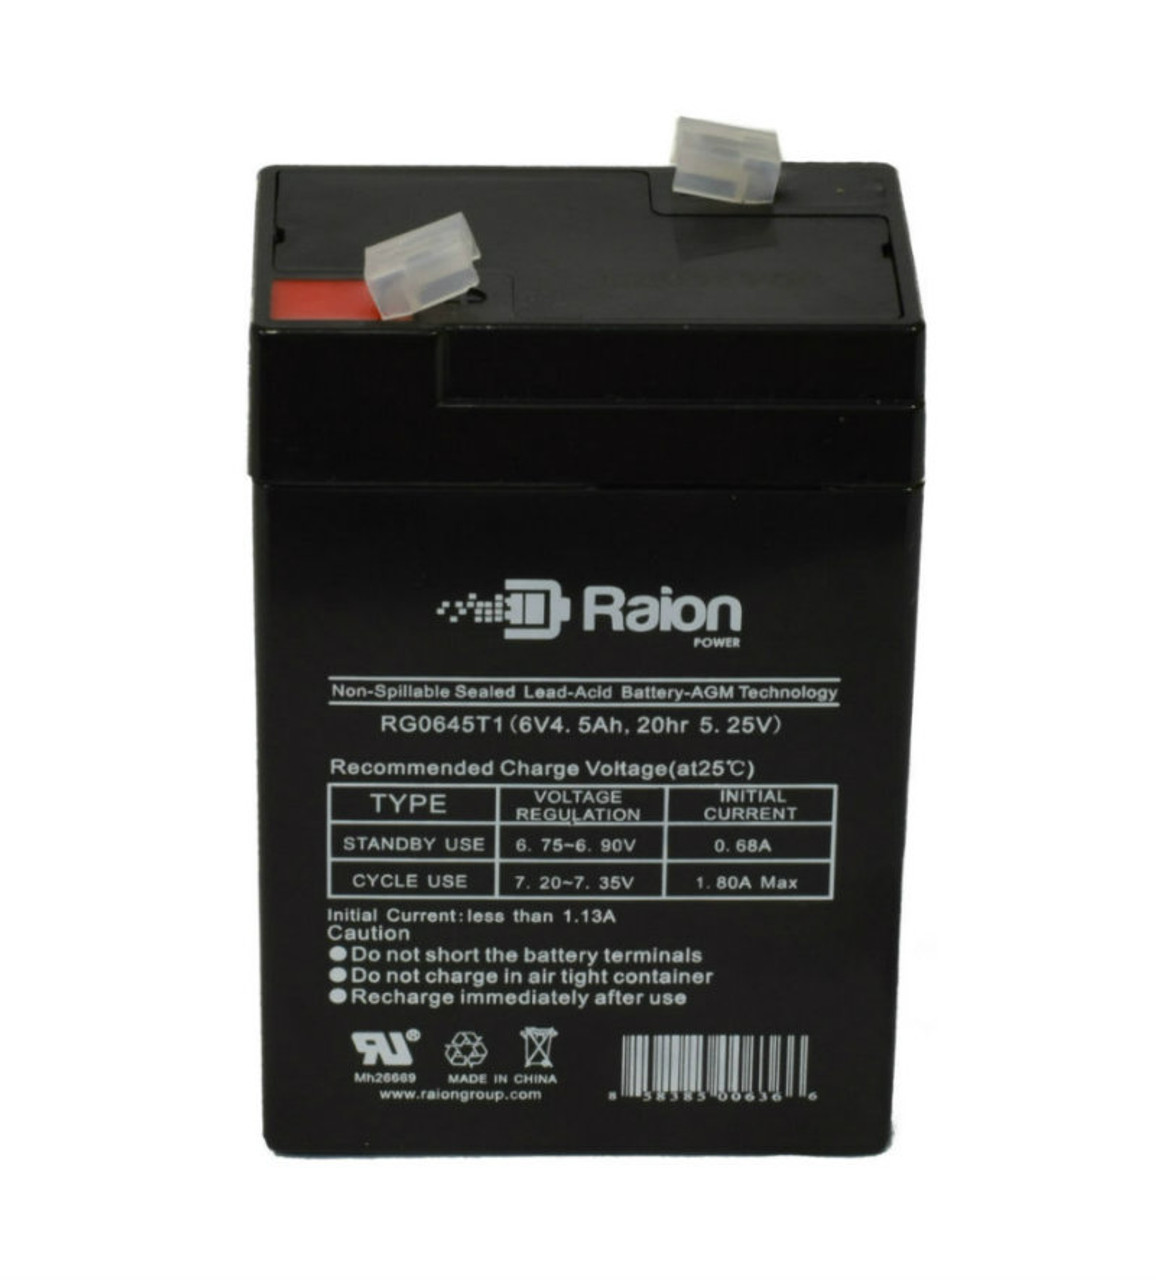 Raion Power RG0645T1 Replacement Battery Cartridge for Celltech CT4.5-6